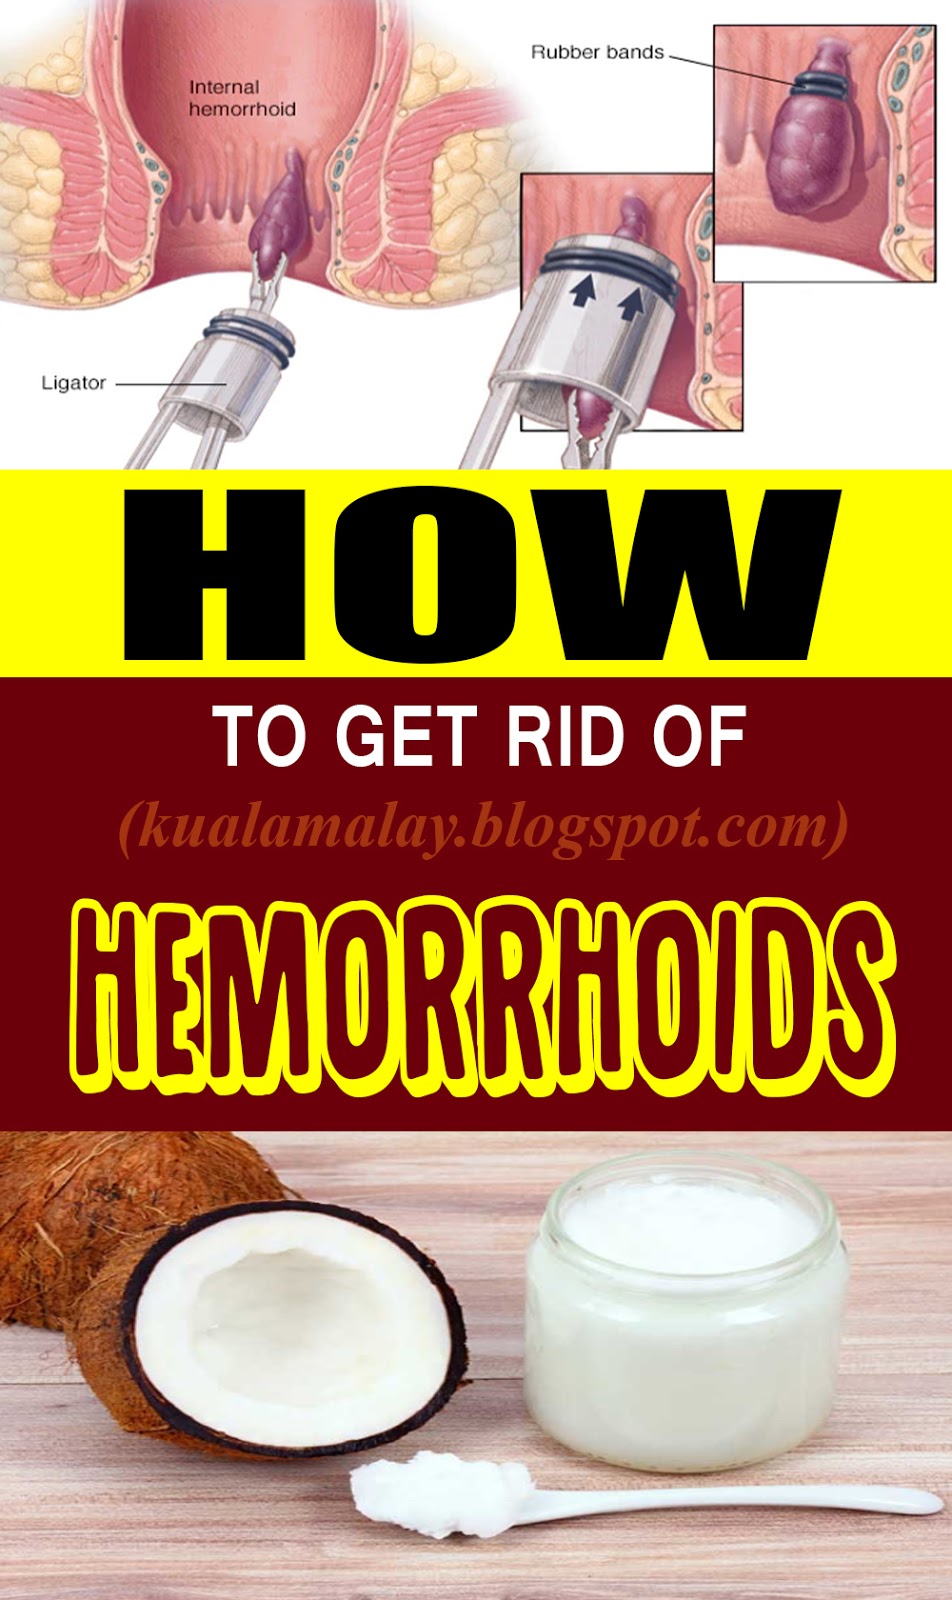 How To Get Rid Of Hemorrhoids Without Surgery